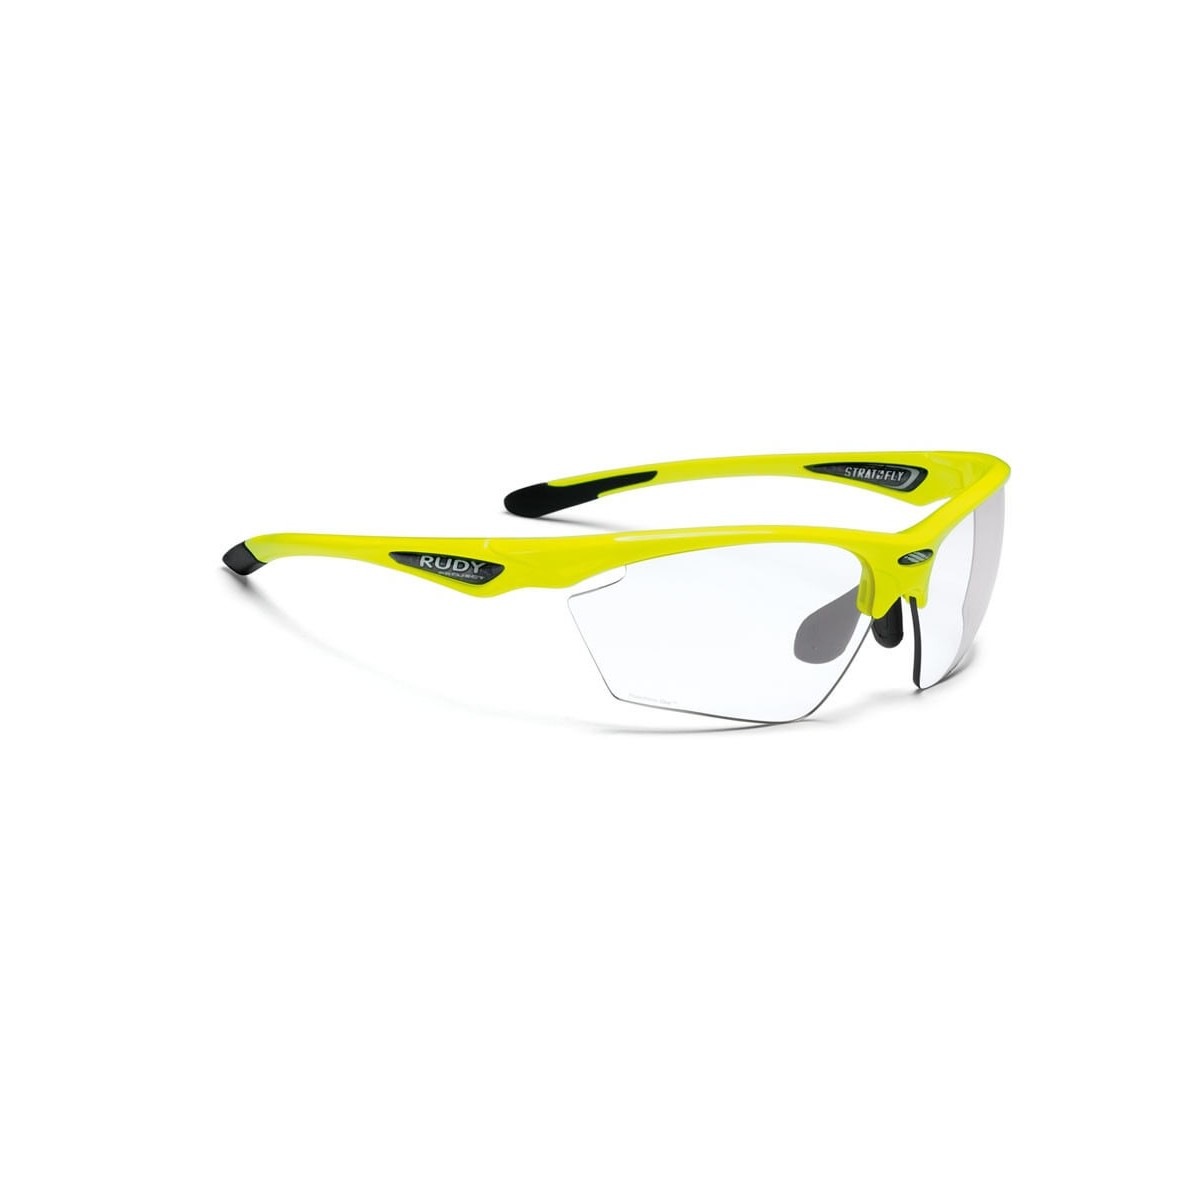 Of S  günstig Kaufen-Stratofly Yellow Fluo RPO Photoclear Rudy Project Brille. Stratofly Yellow Fluo RPO Photoclear Rudy Project Brille . 